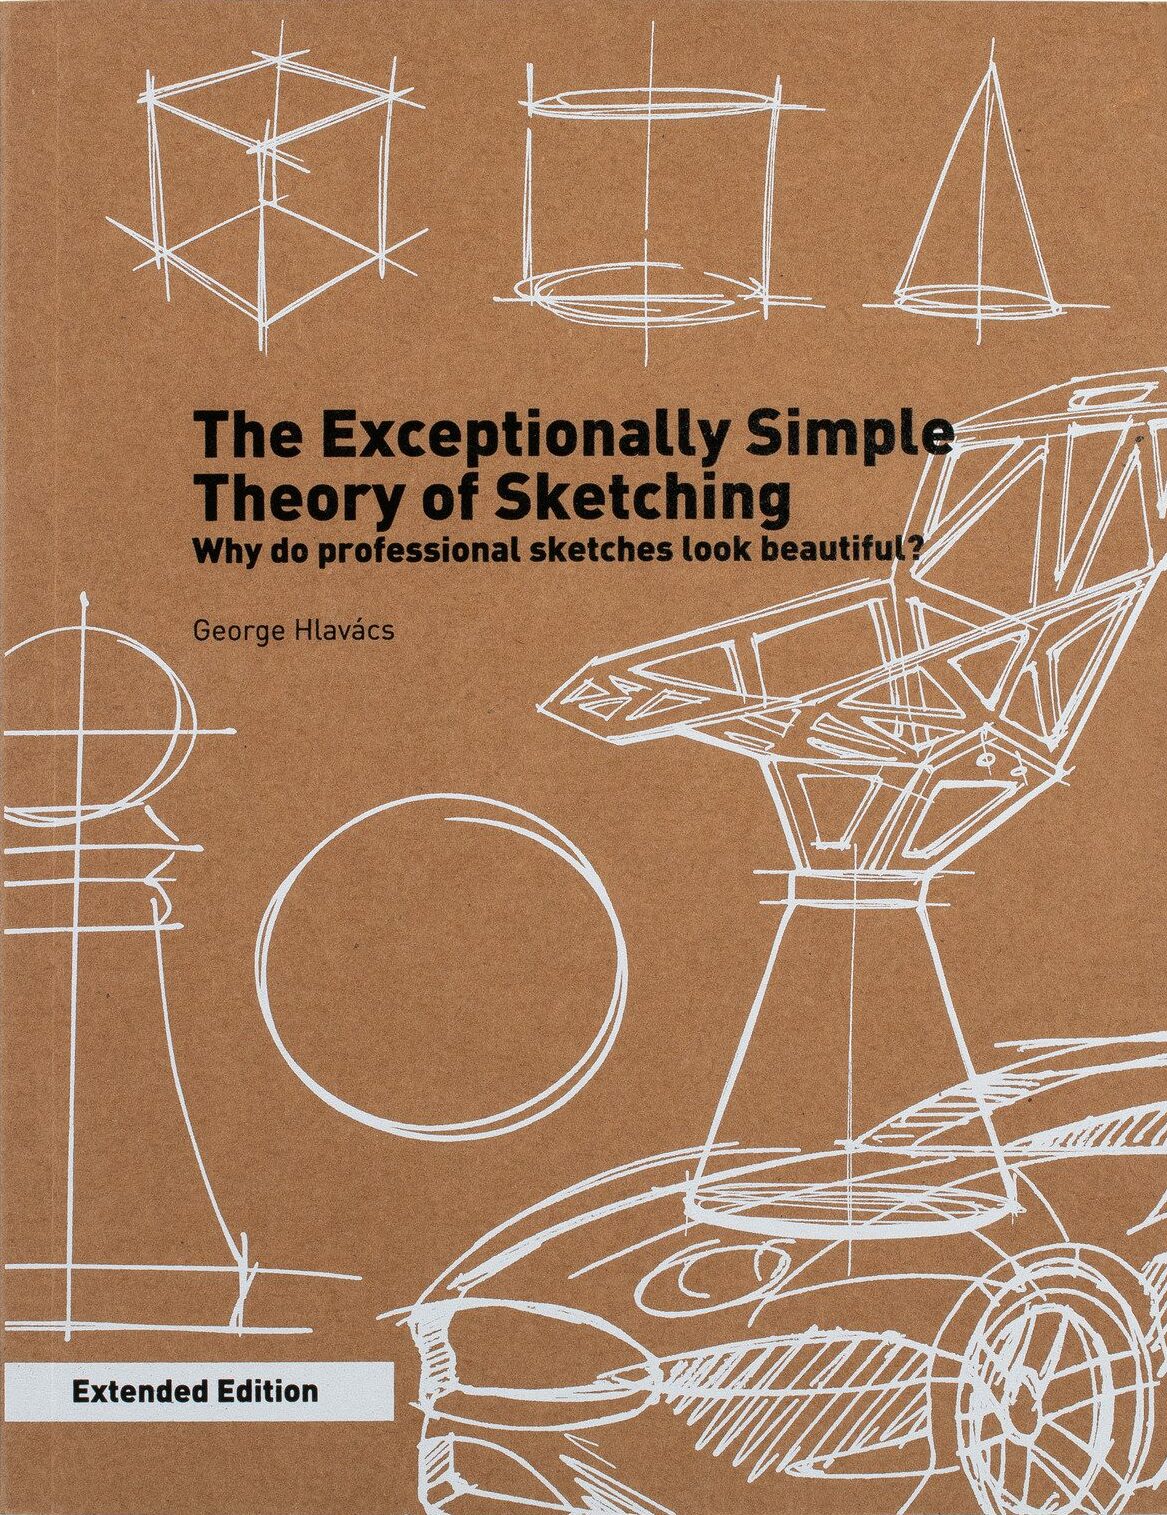 The Exceptionally Simple Theory of Sketching